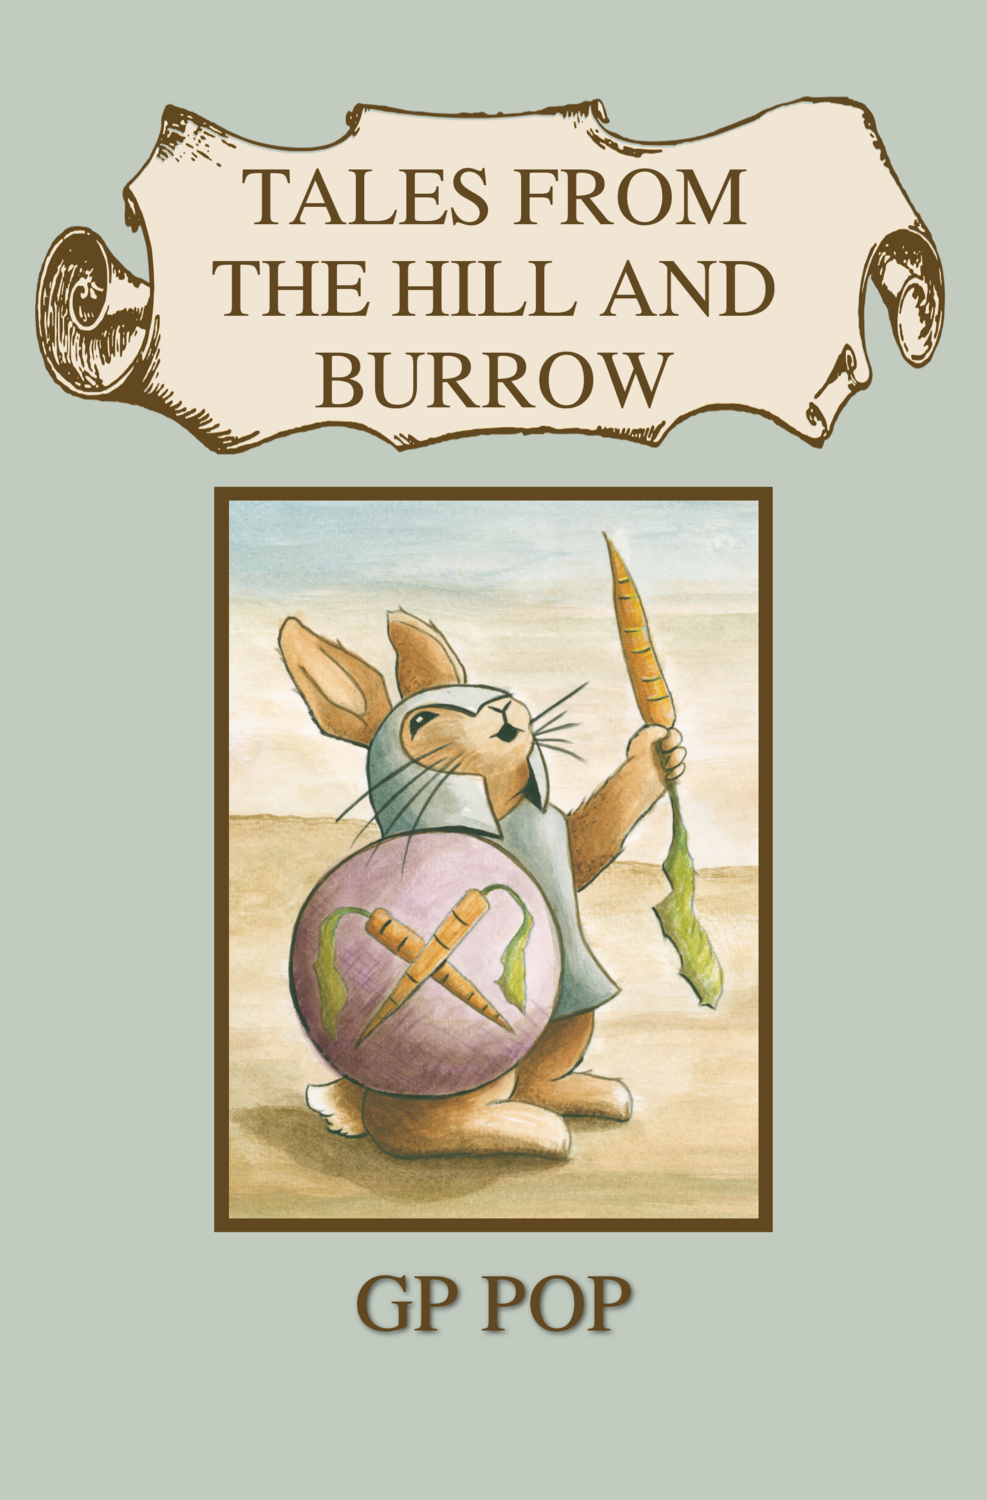 Tales From the Hill and Burrow, by GP Pop